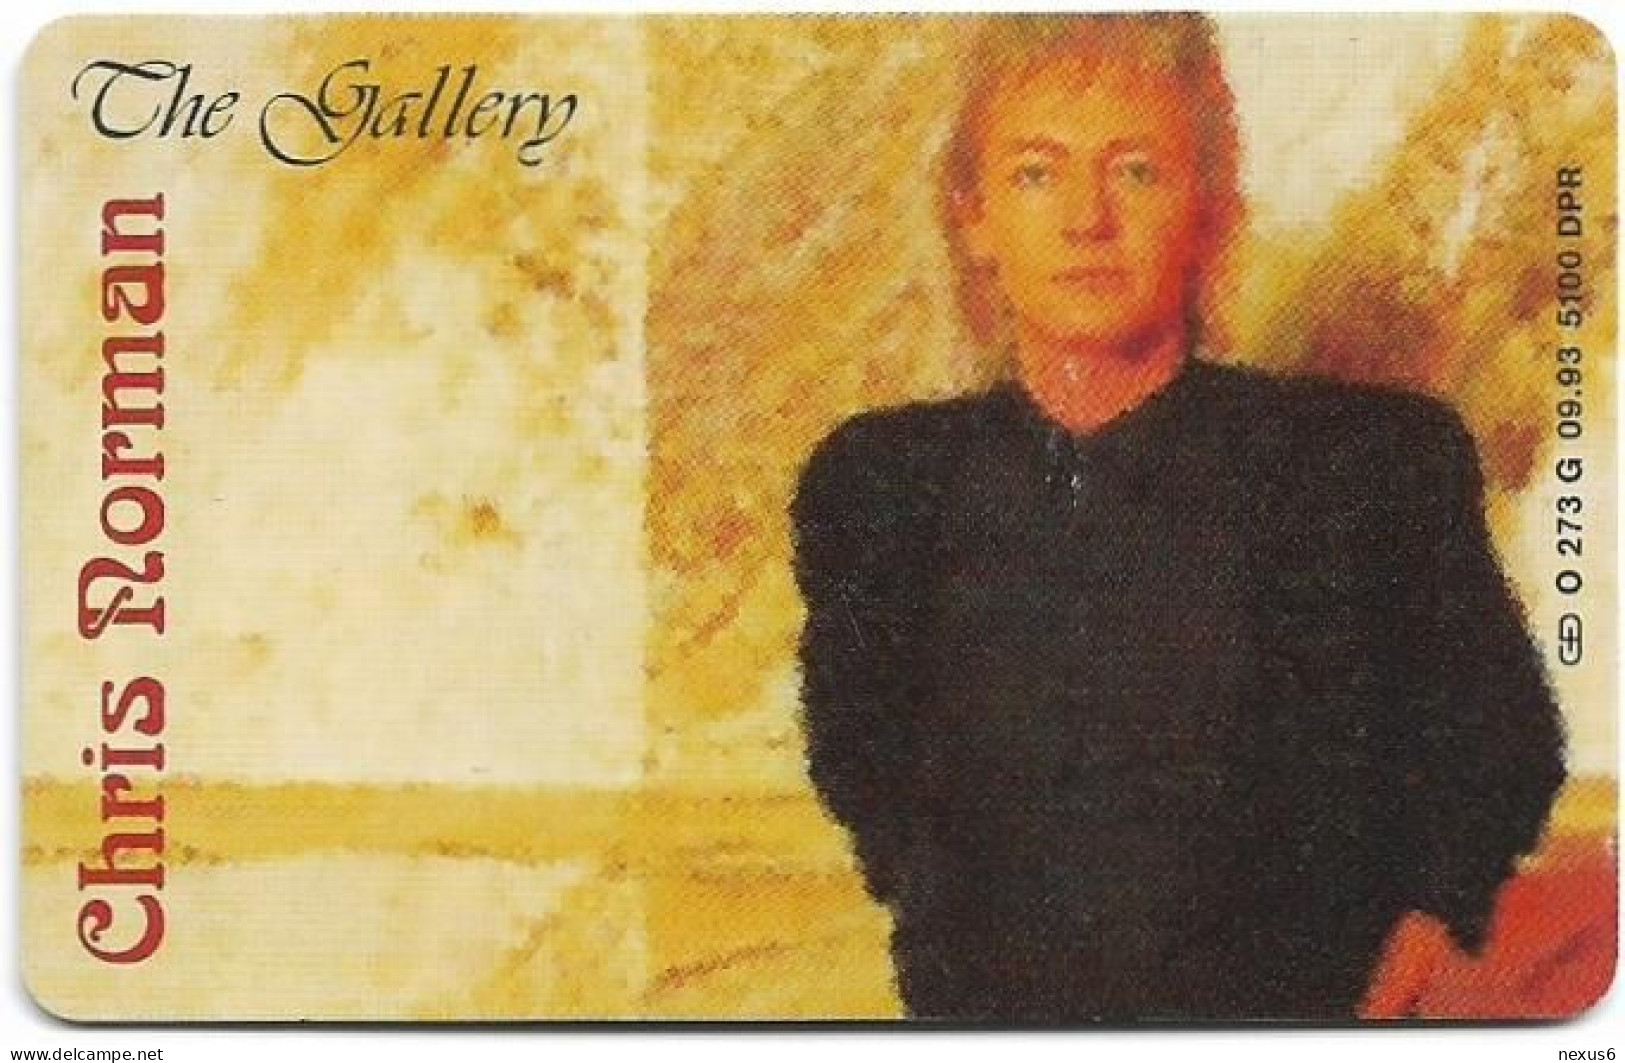 Germany - The Gallery 7 - Chris Norman - O 0273G - 09.1993, 6DM, 5.100ex, Used - O-Series : Customers Sets